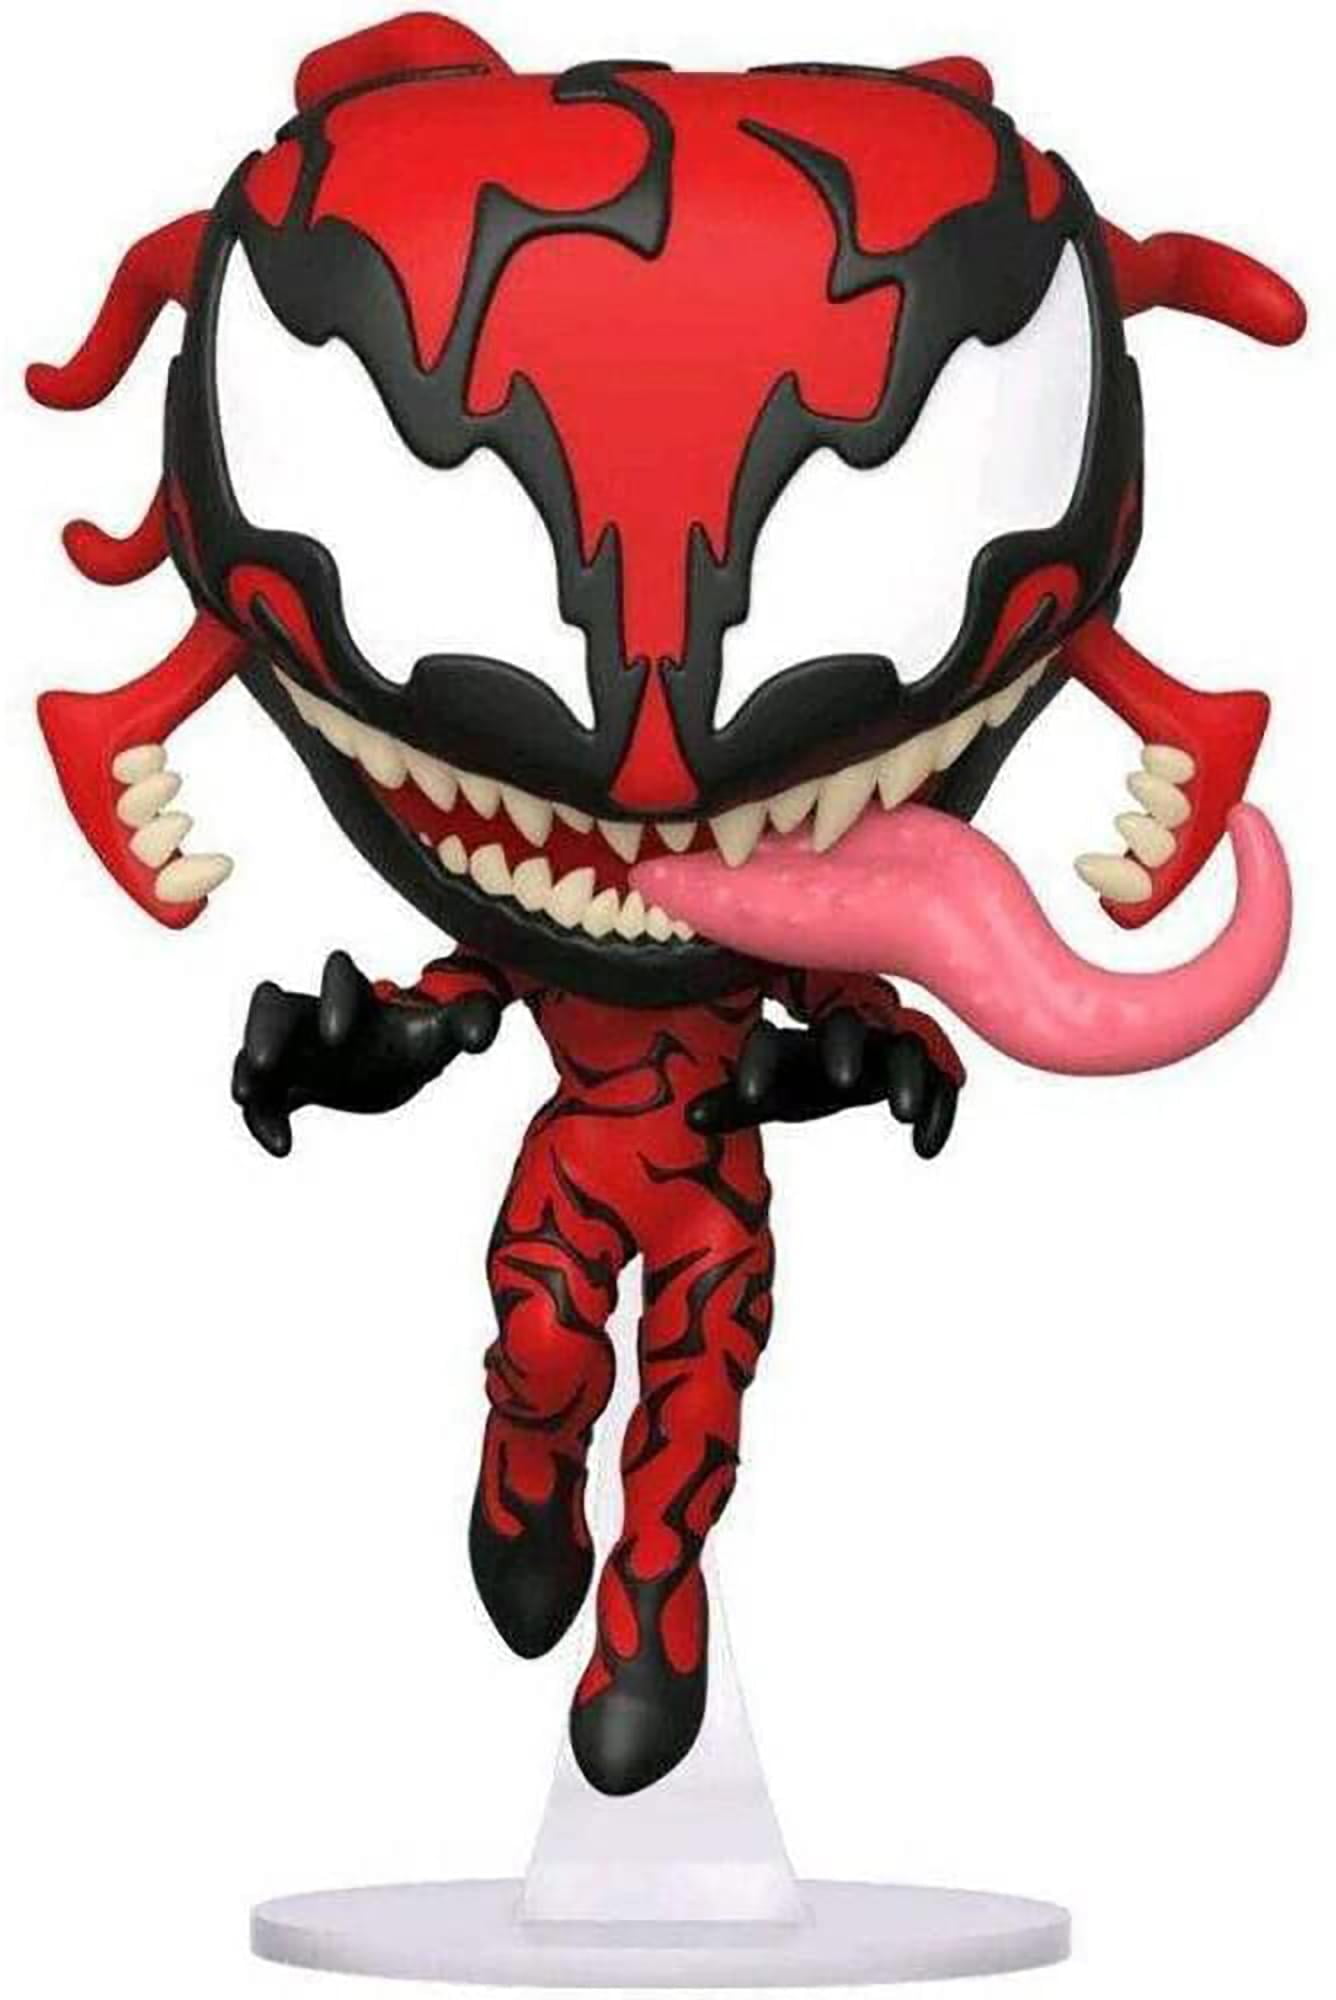 Funko POP! Jumbo: Venom 2 - Carnage - Collectable Vinyl Figure - Gift Idea  - Official Merchandise - Toys for Kids & Adults - Movies Fans - Model